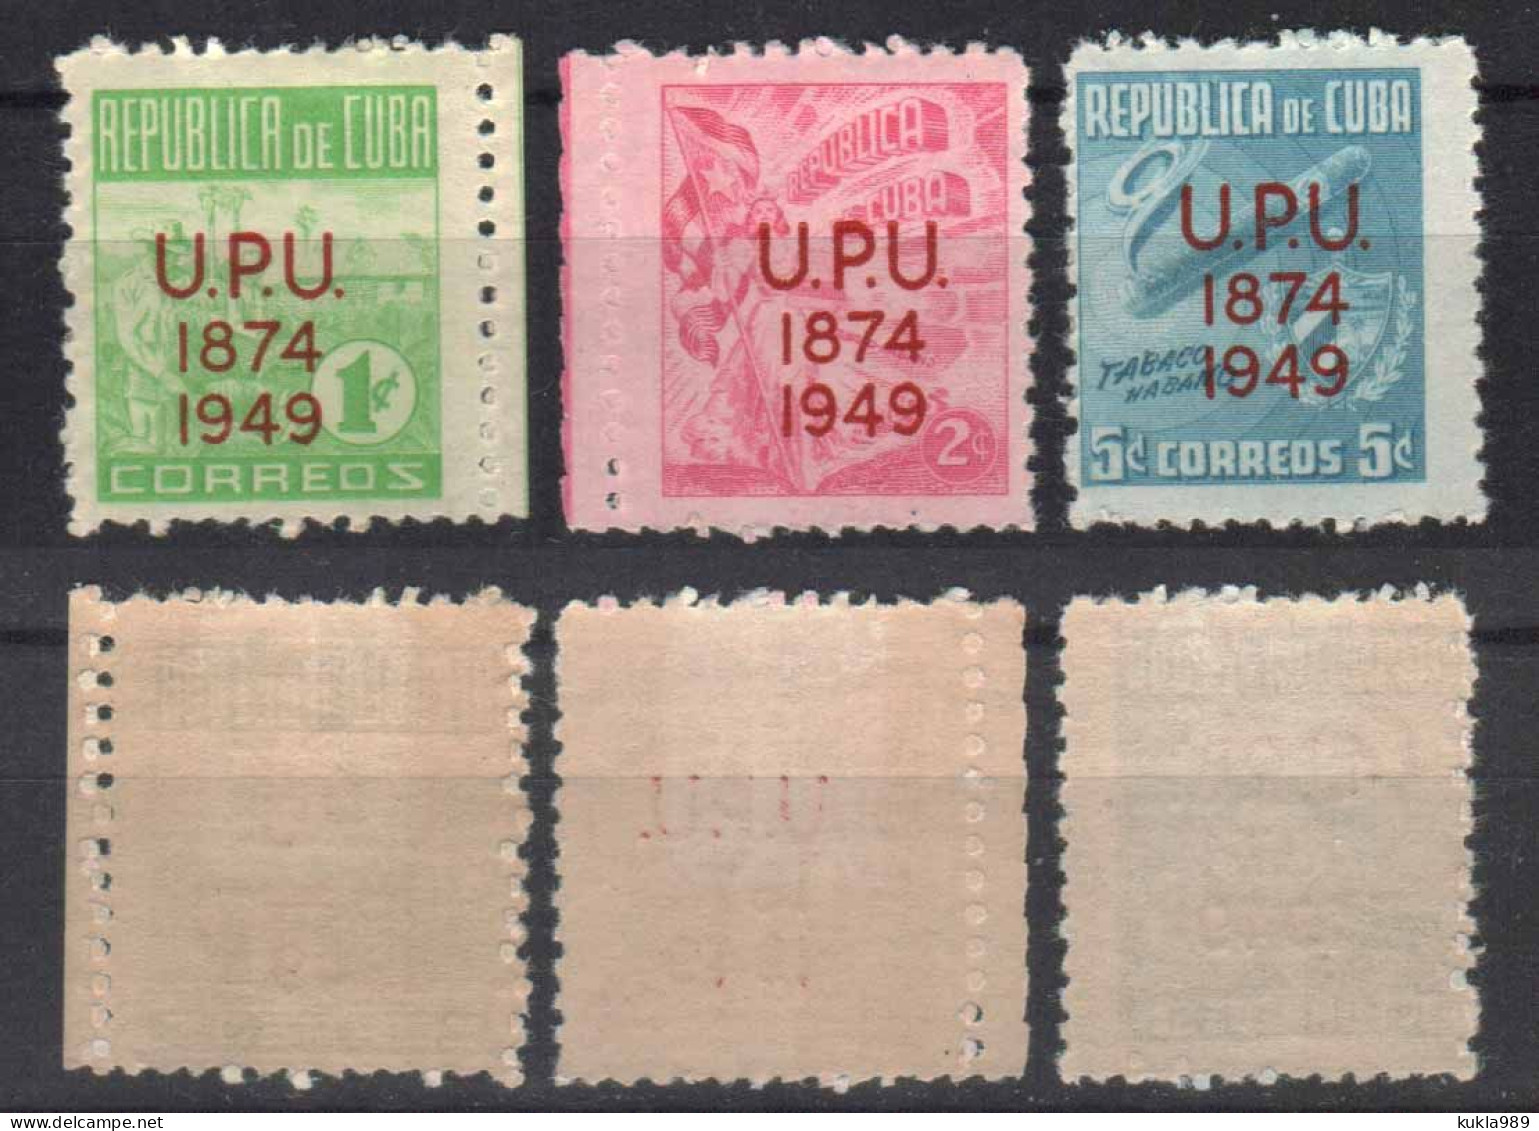 CUBA STAMPS - 1949 UPU ANNIVERSARY SET COMPLETE MLH - Unused Stamps